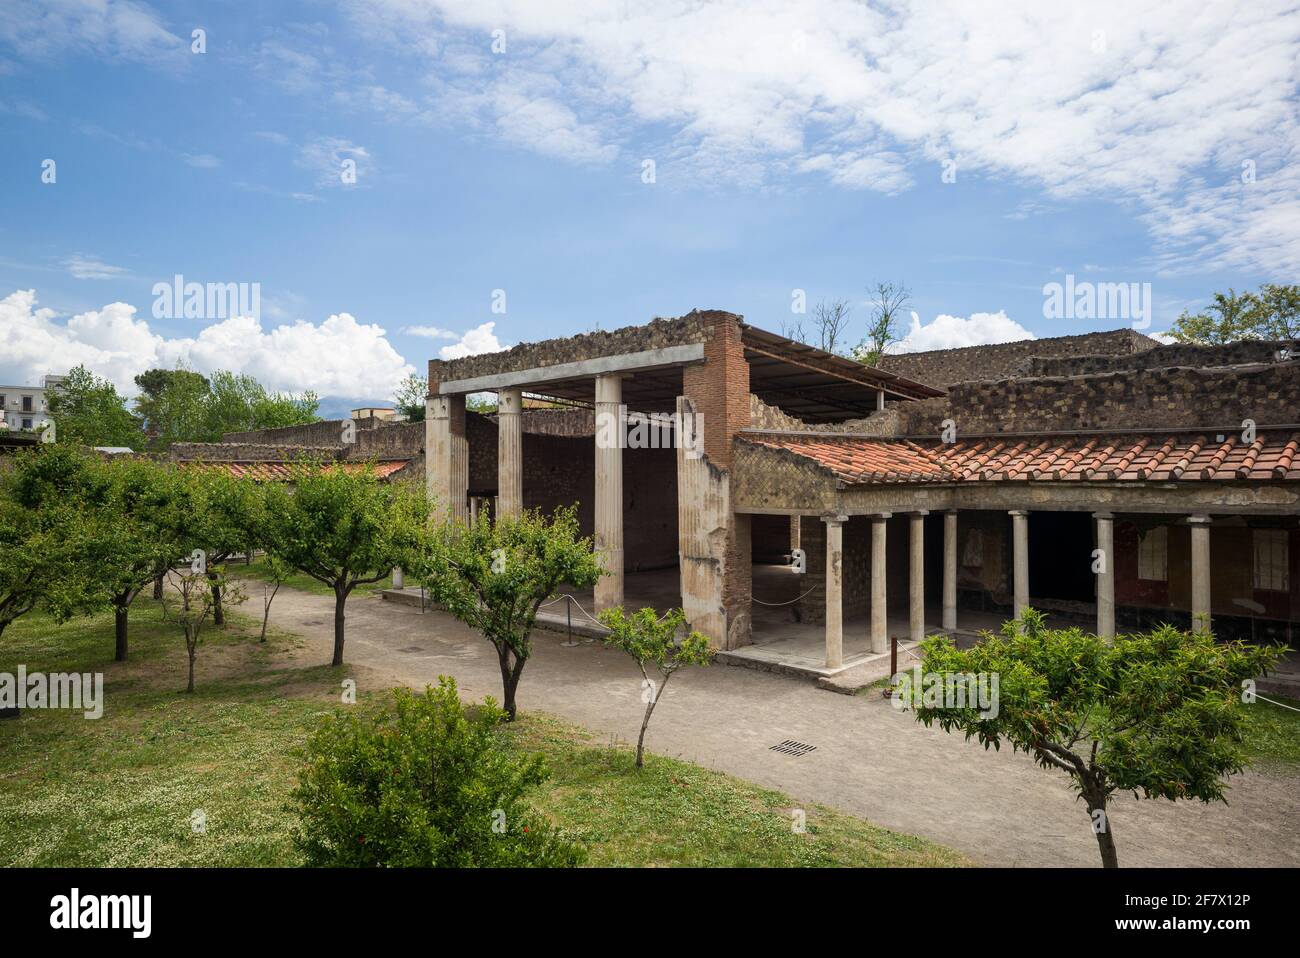 Torre Annunziata. Italy. Archaeological site of Oplontis (Villa di Poppea / Villa Poppaea). Exterior view showing the main entrance. Stock Photo